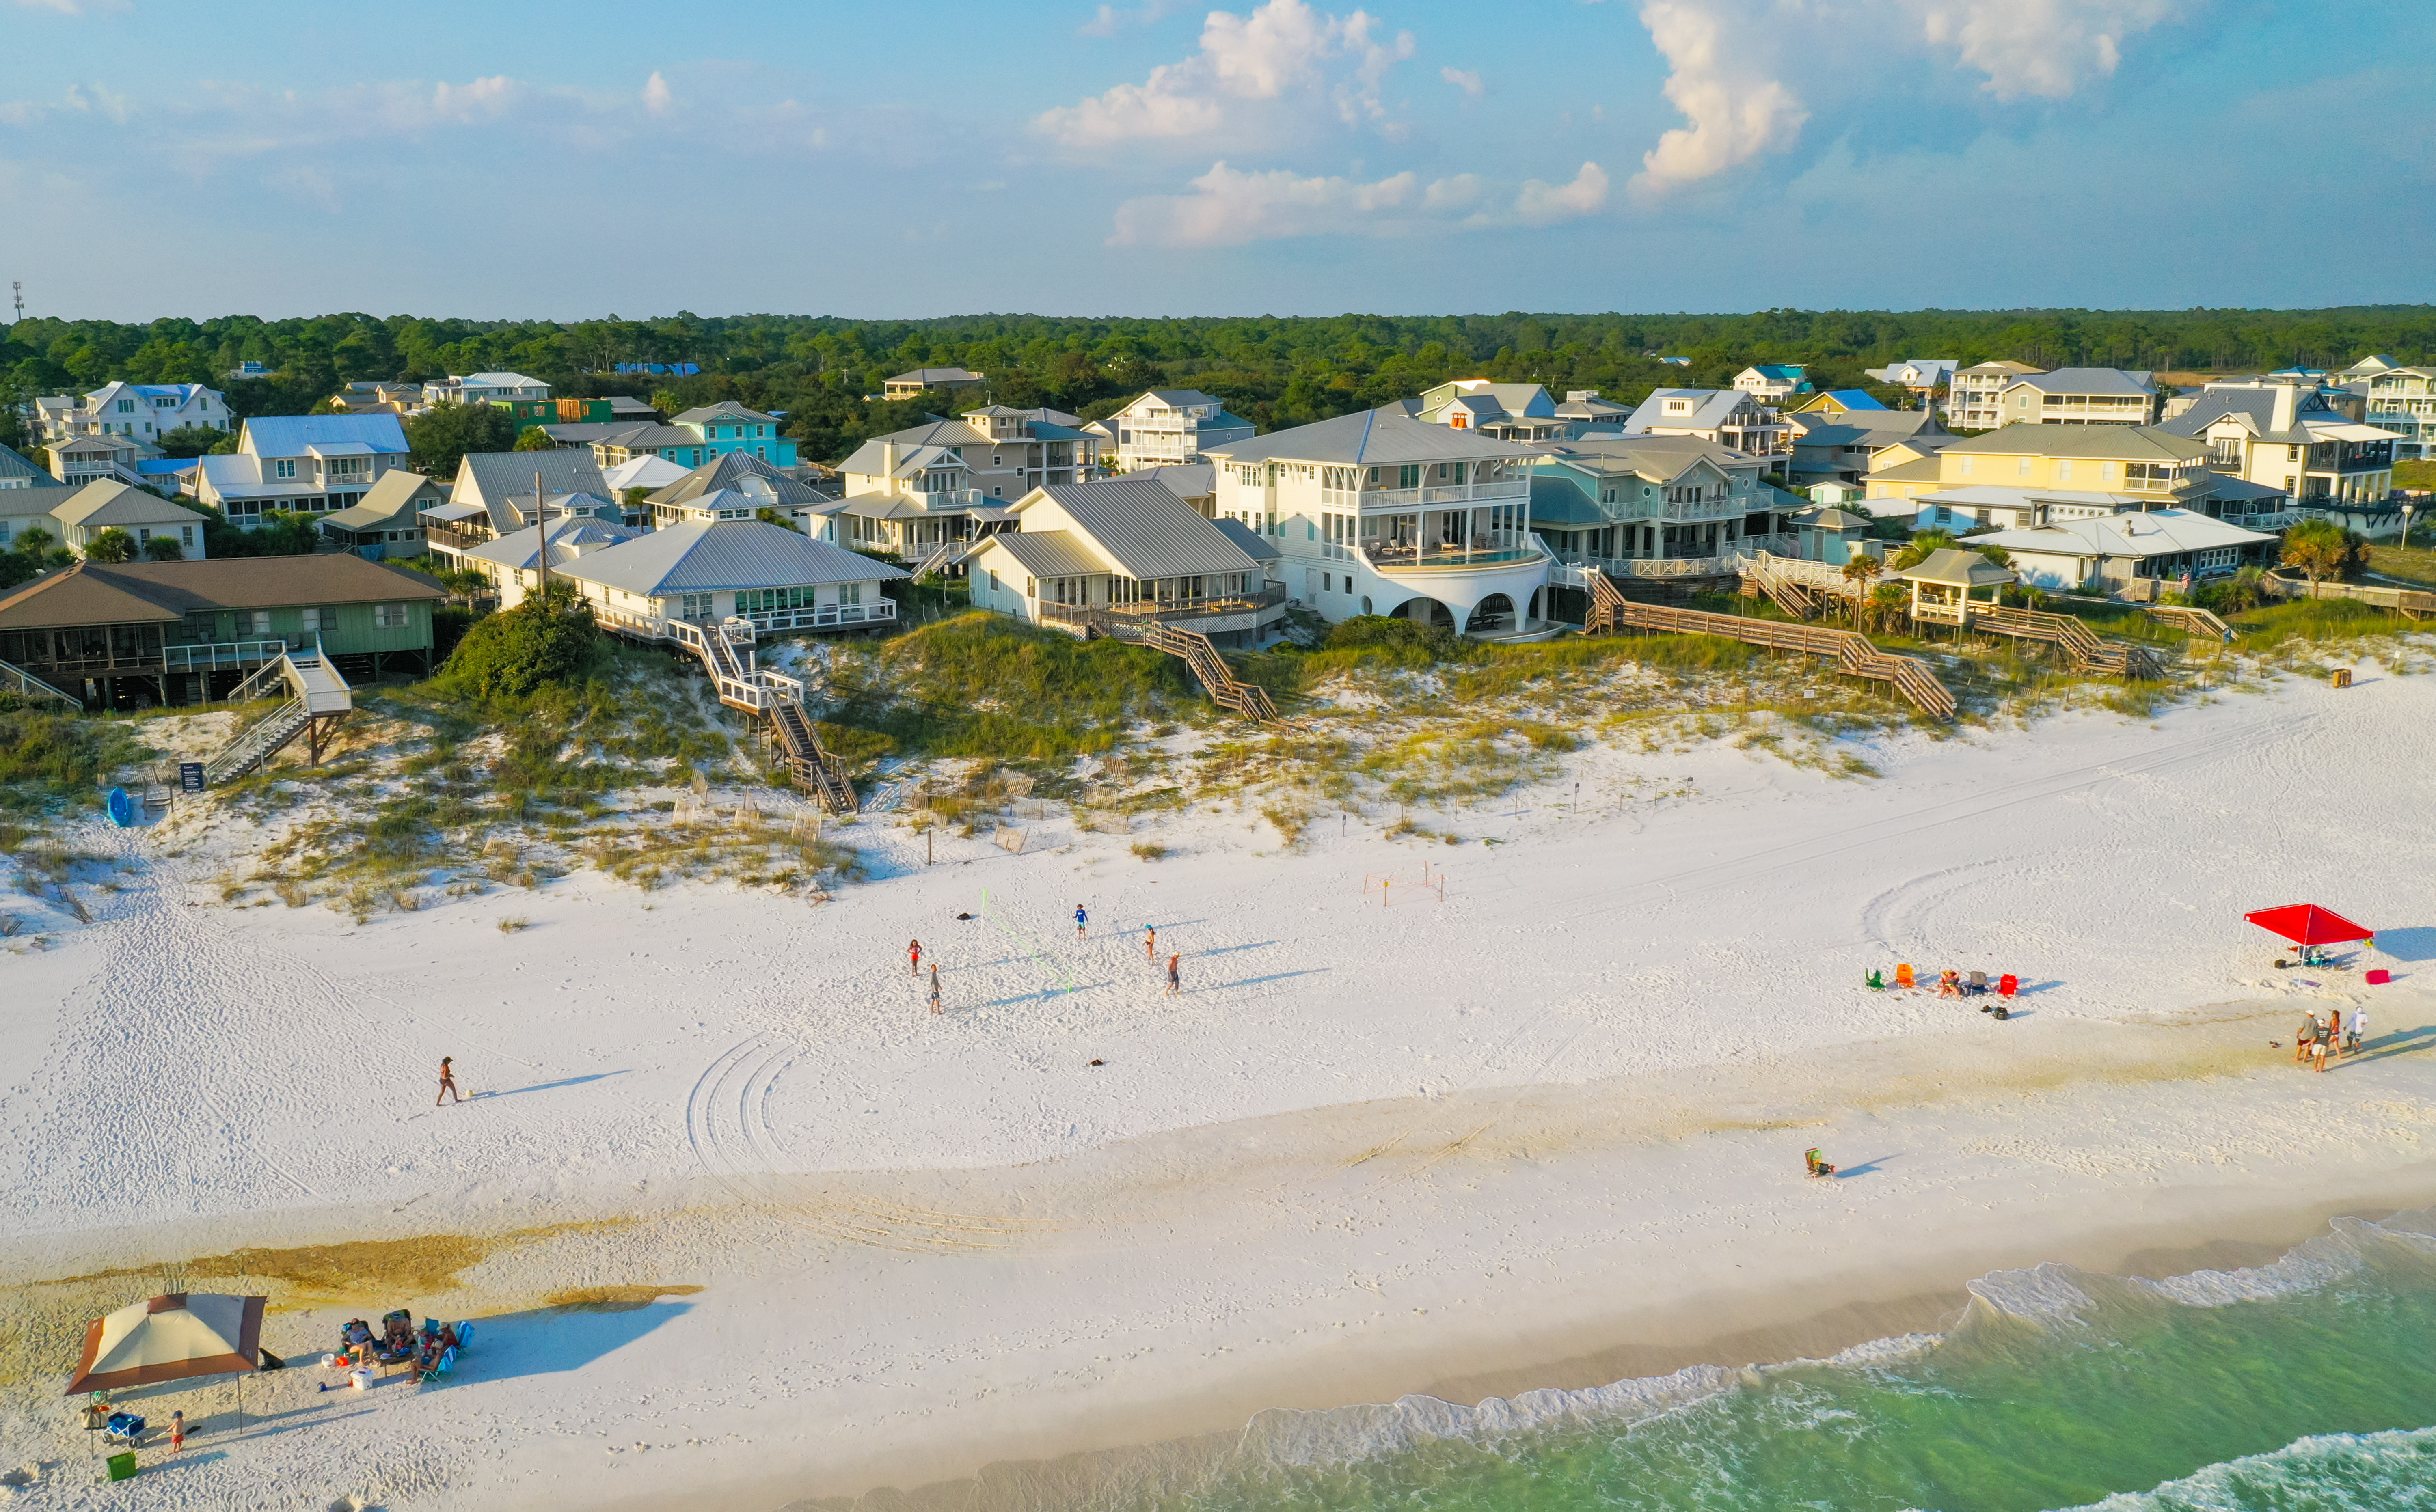 A relaxing day on the beach at Grayton Beach with Gulf front homes in the background